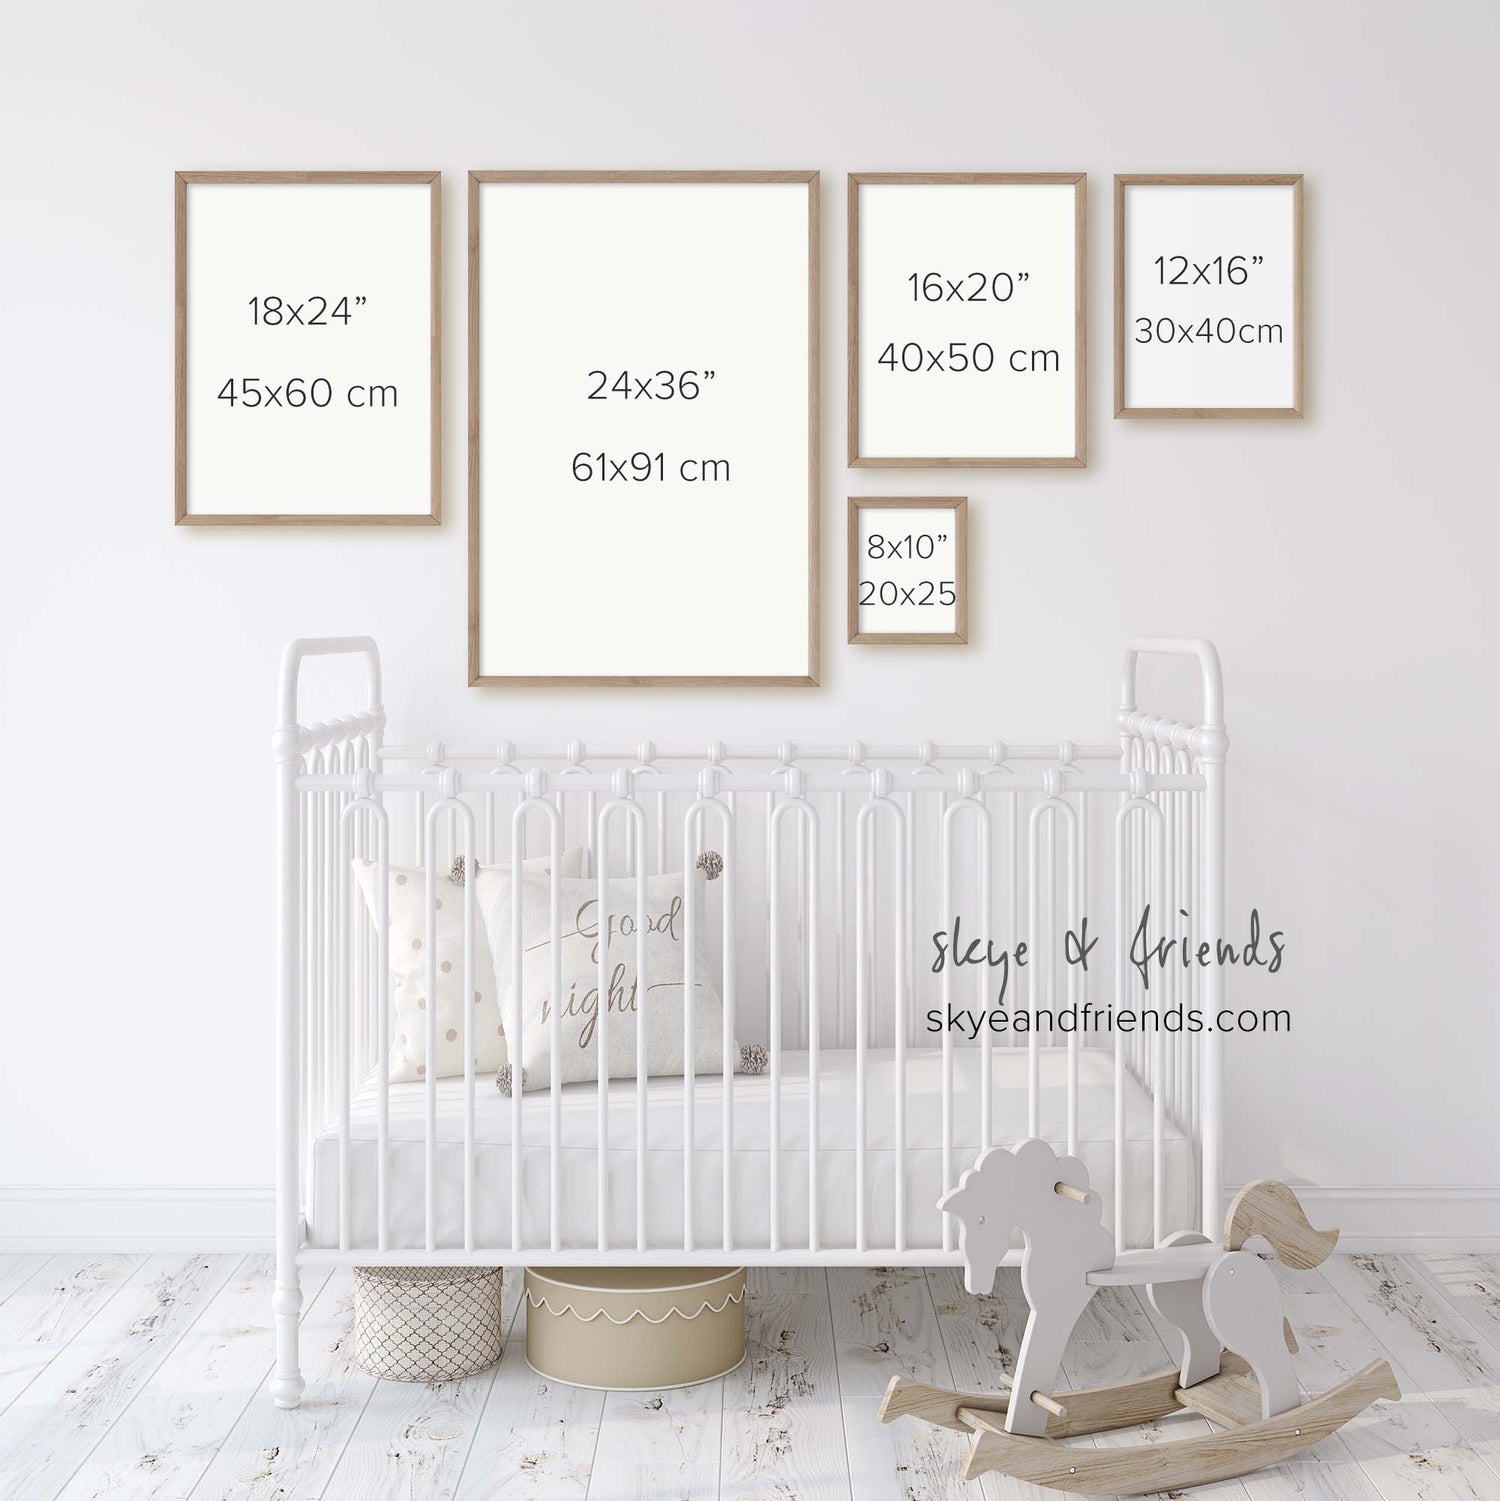 What Size Prints Should I Get for the Nursery?